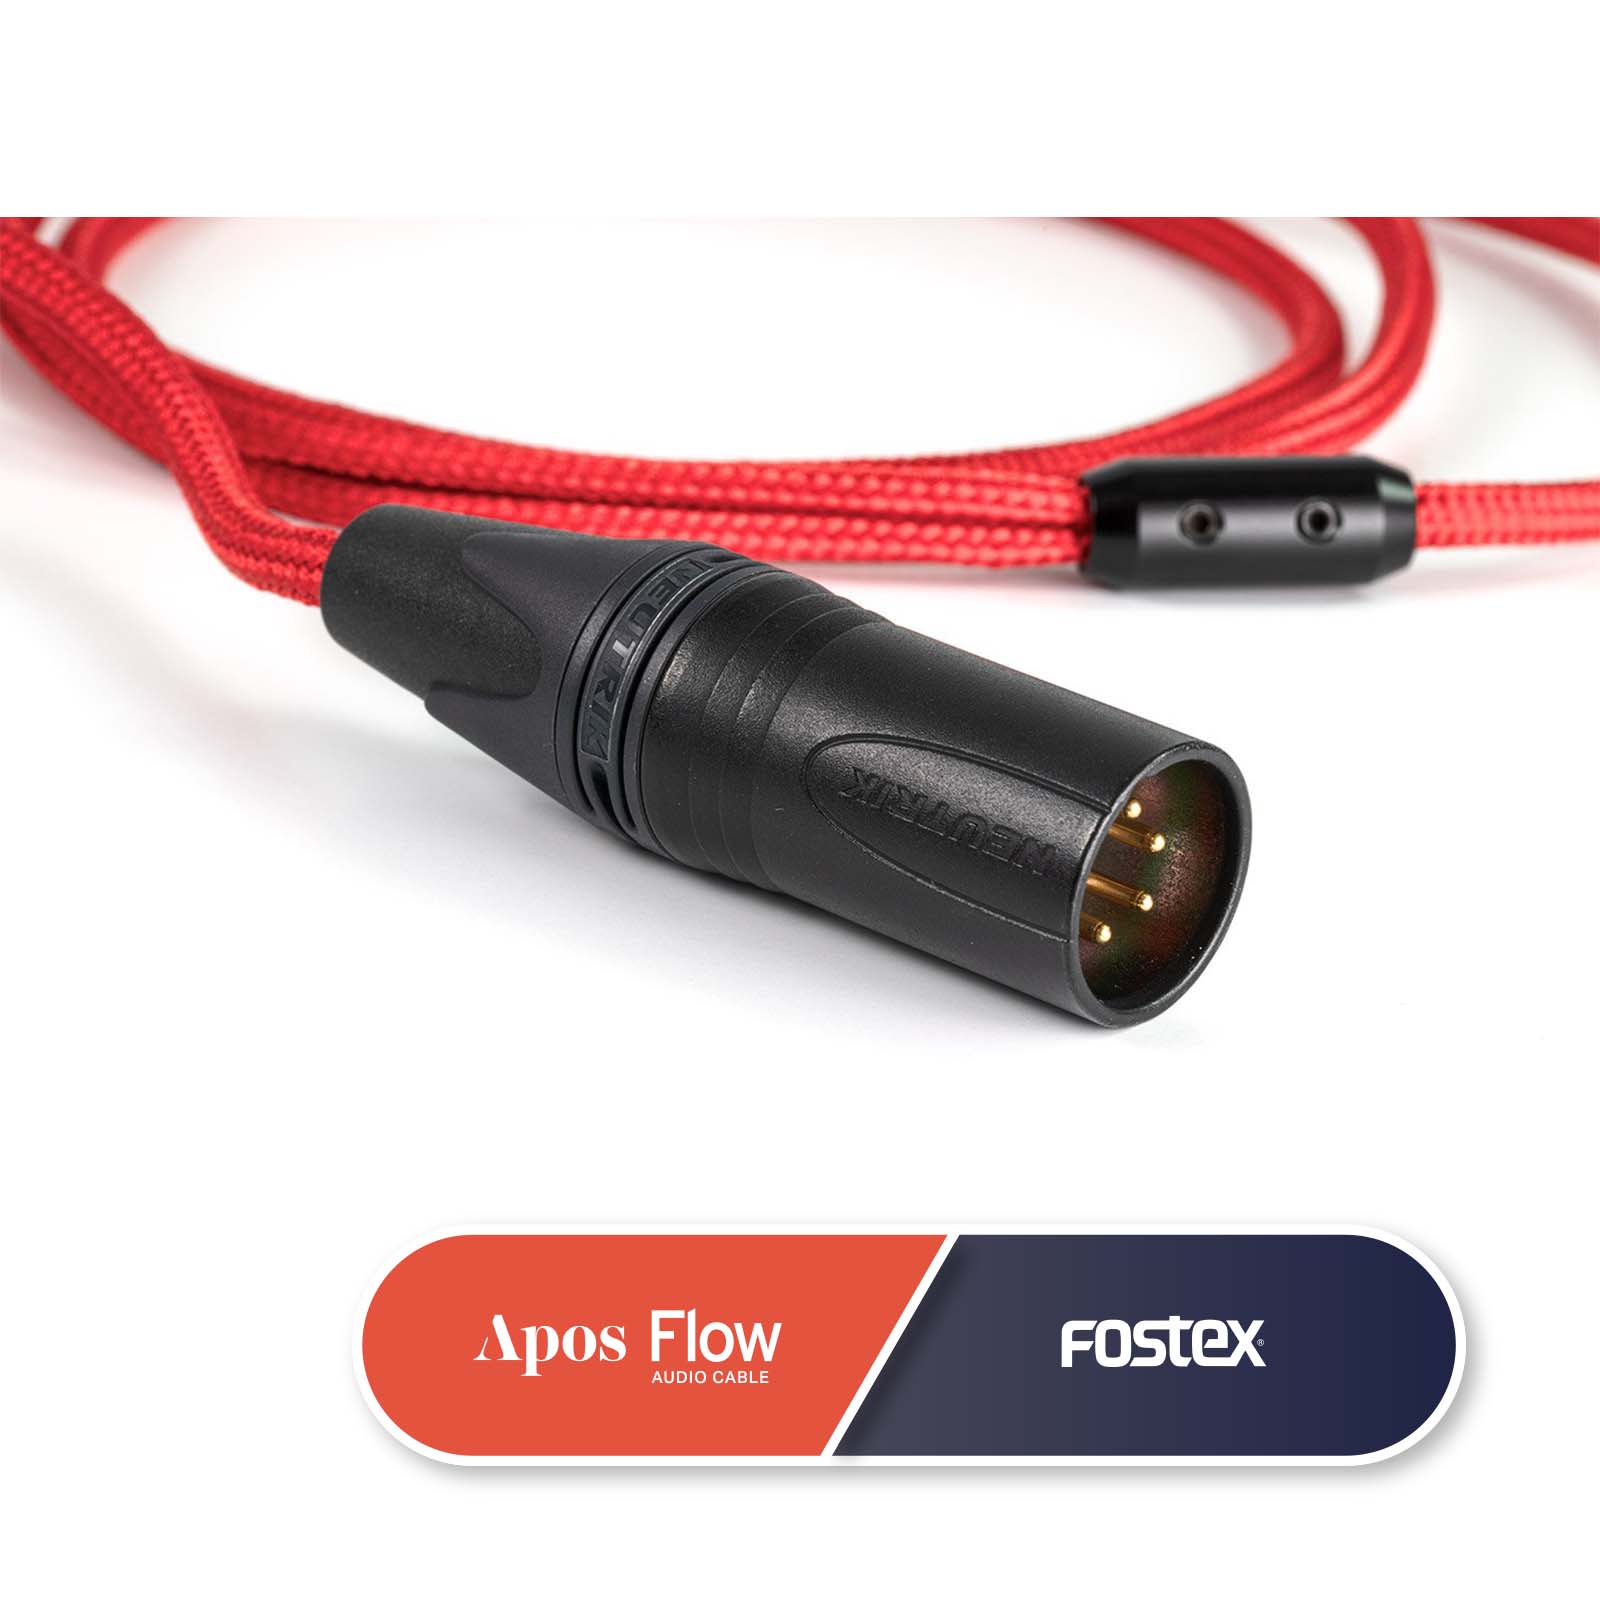 Apos Flow Headphone Cable for [Fostex] TH610 / TH900mk2